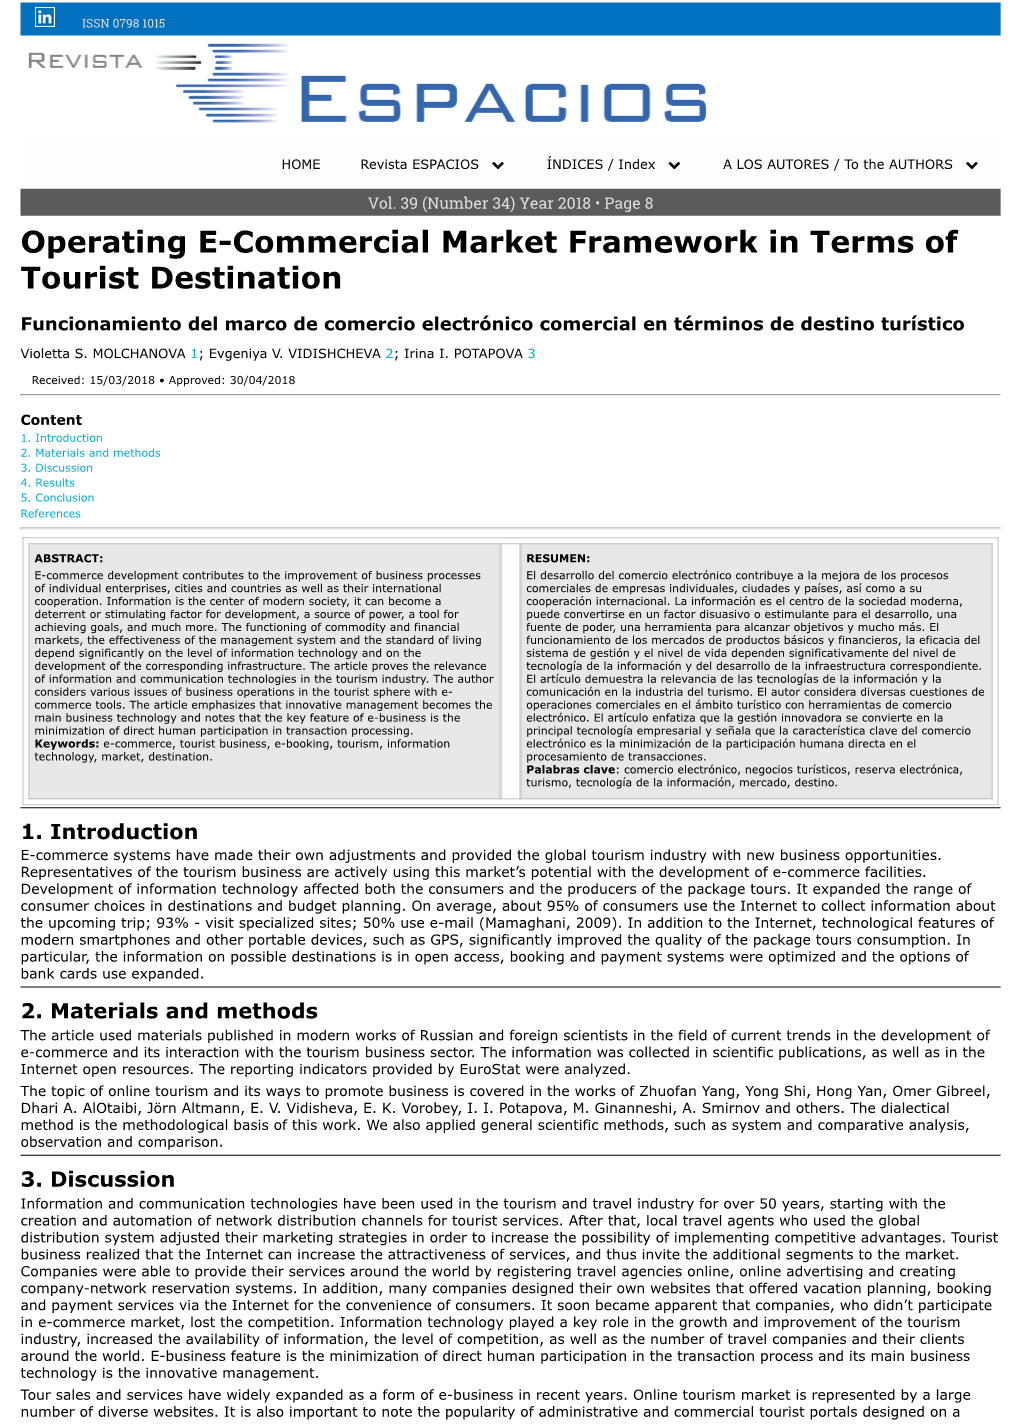 Operating E-Commercial Market Framework in Terms of Tourist Destination